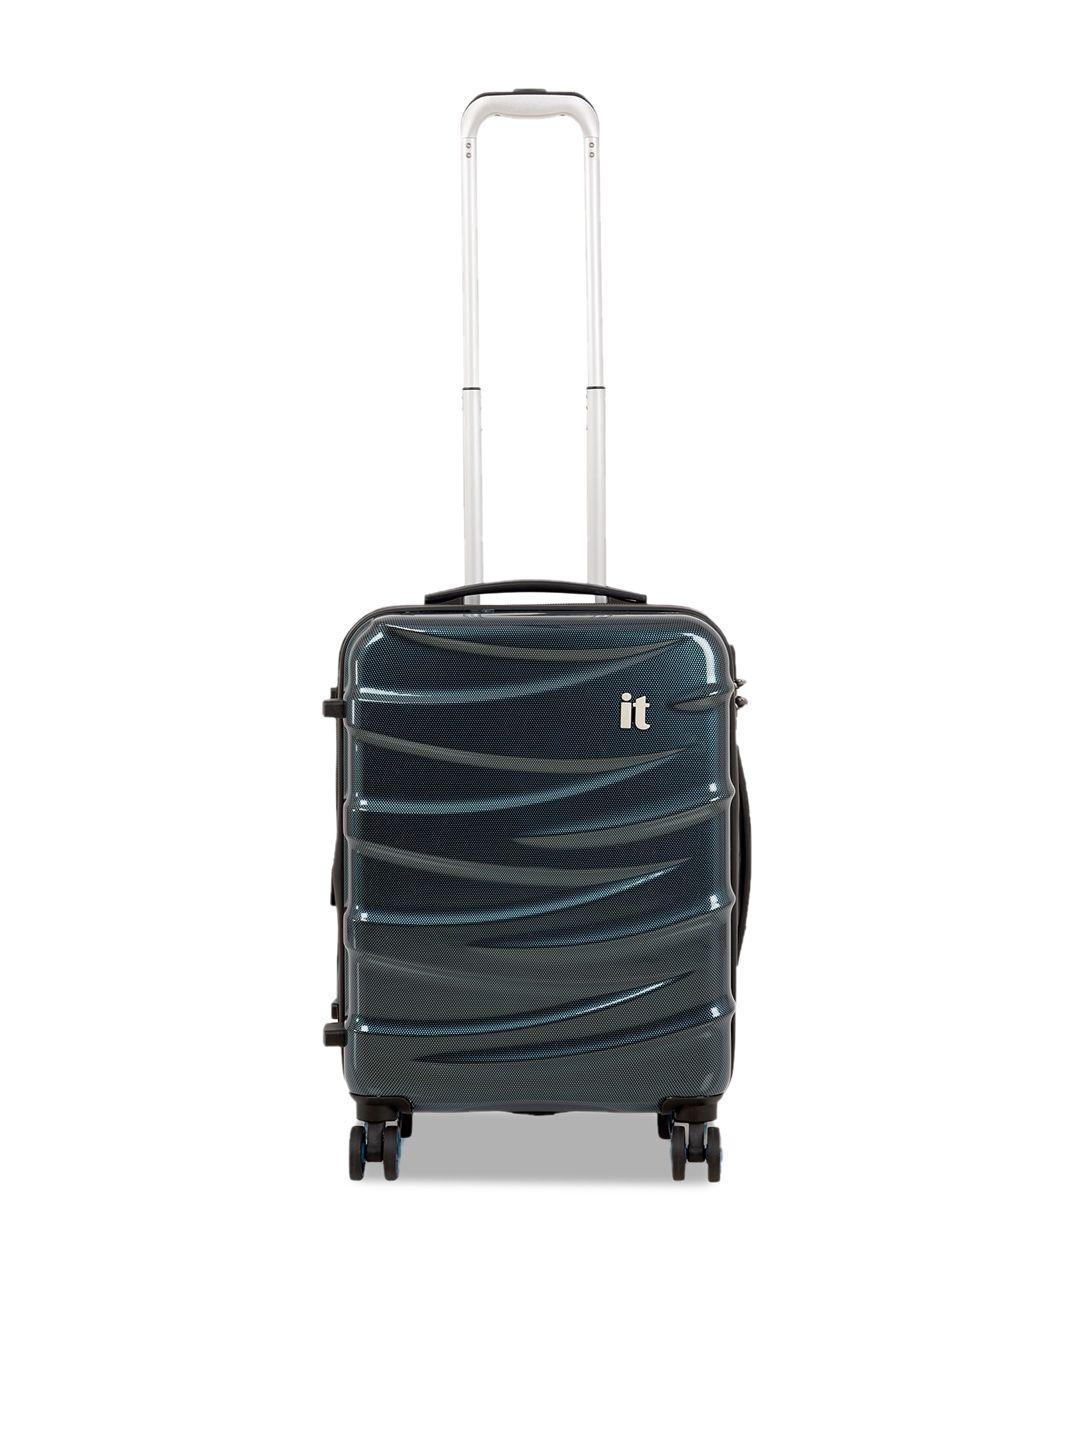 it luggage turquoise blue textured cabin trolley bag